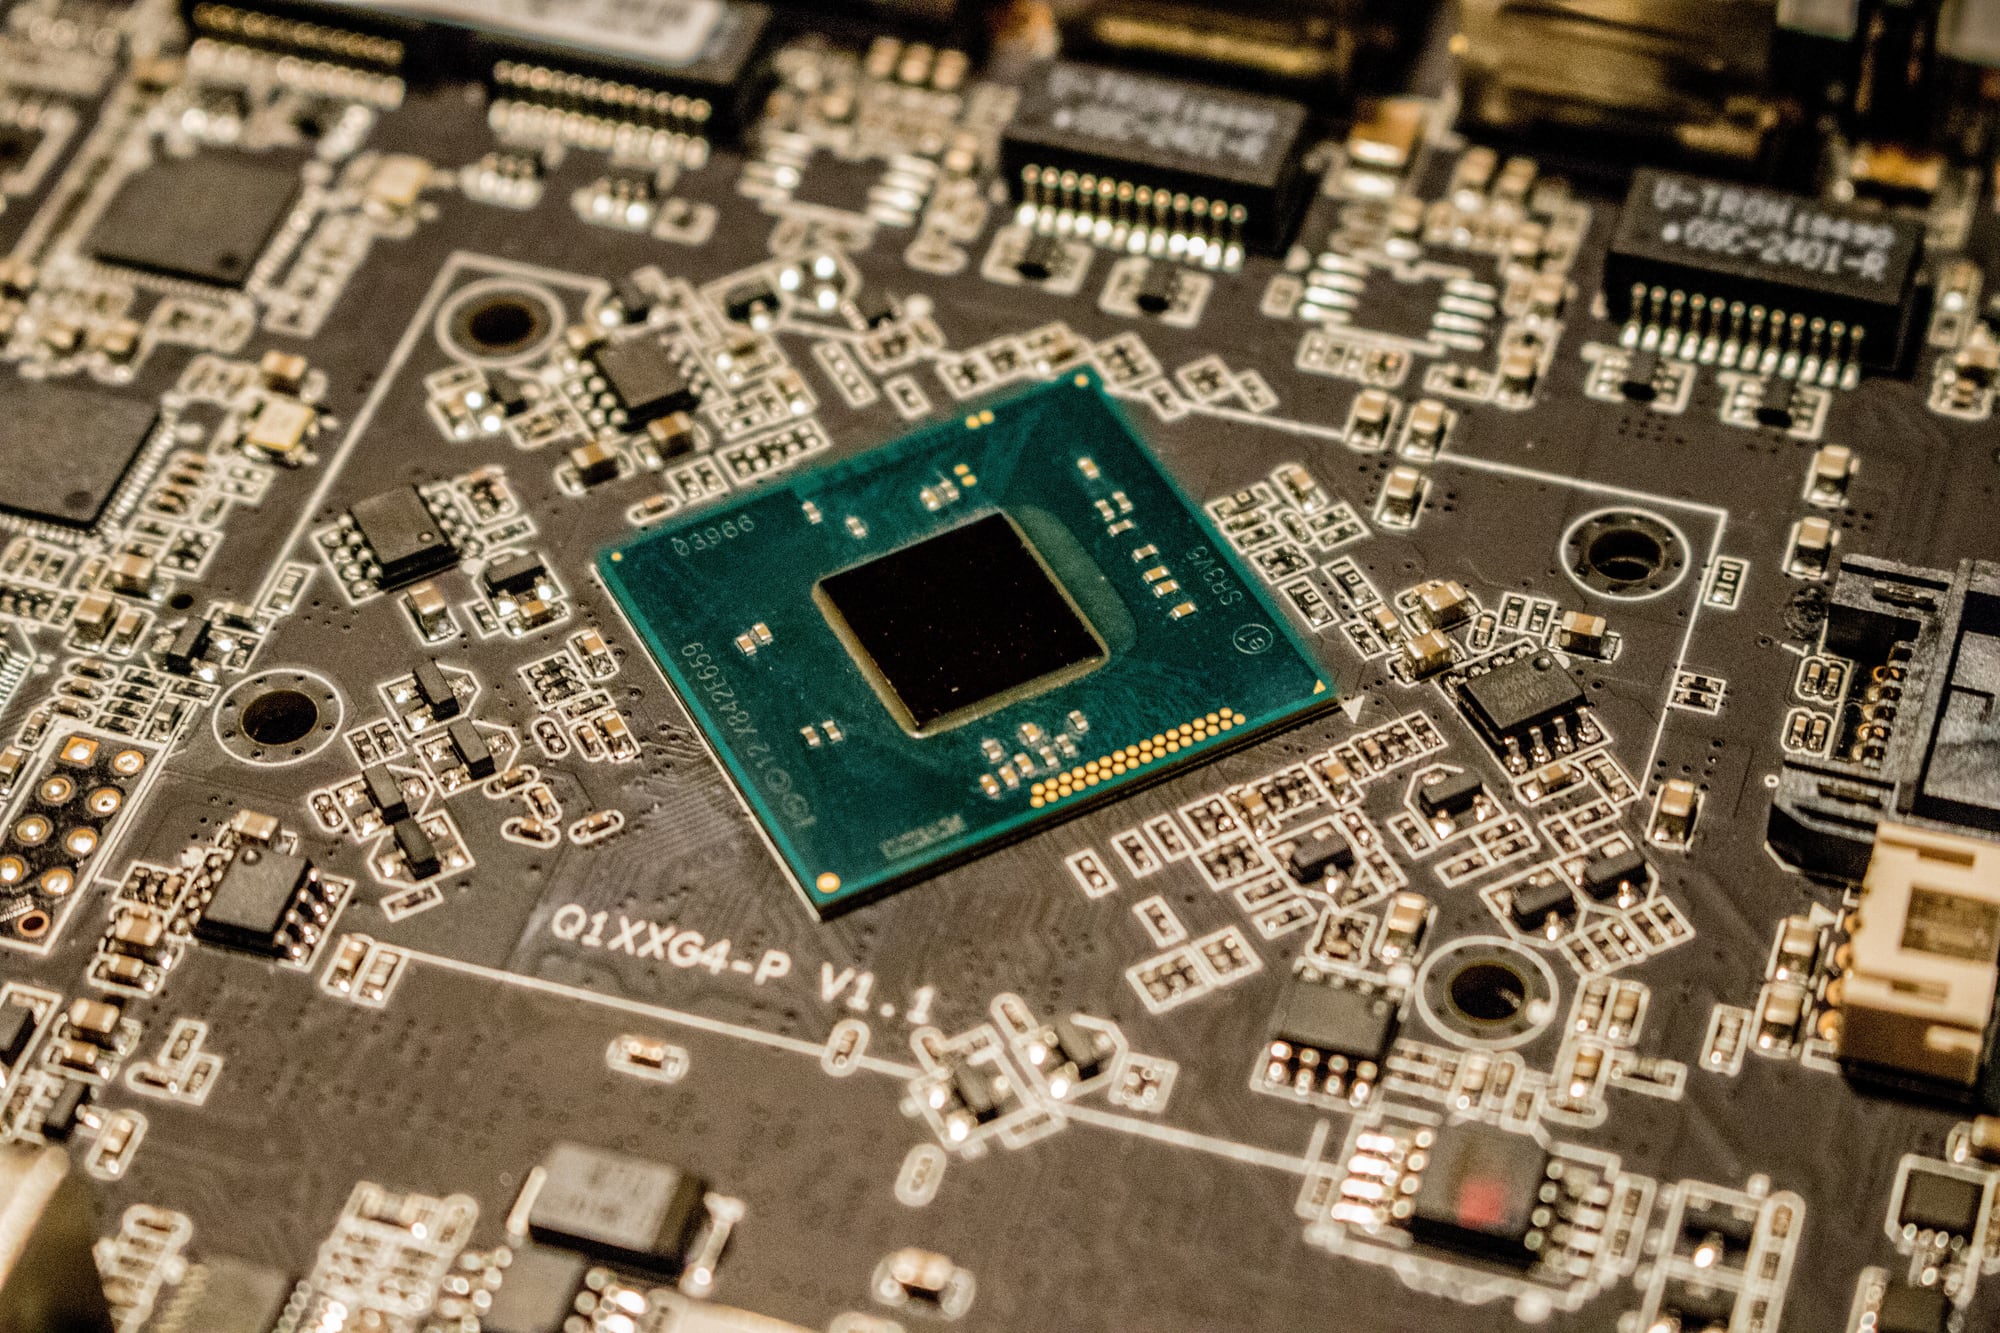 Trevor’s Tech Thoughts: Singapore needs another Chartered Semiconductor Manufacturing to ignite its chip making industry